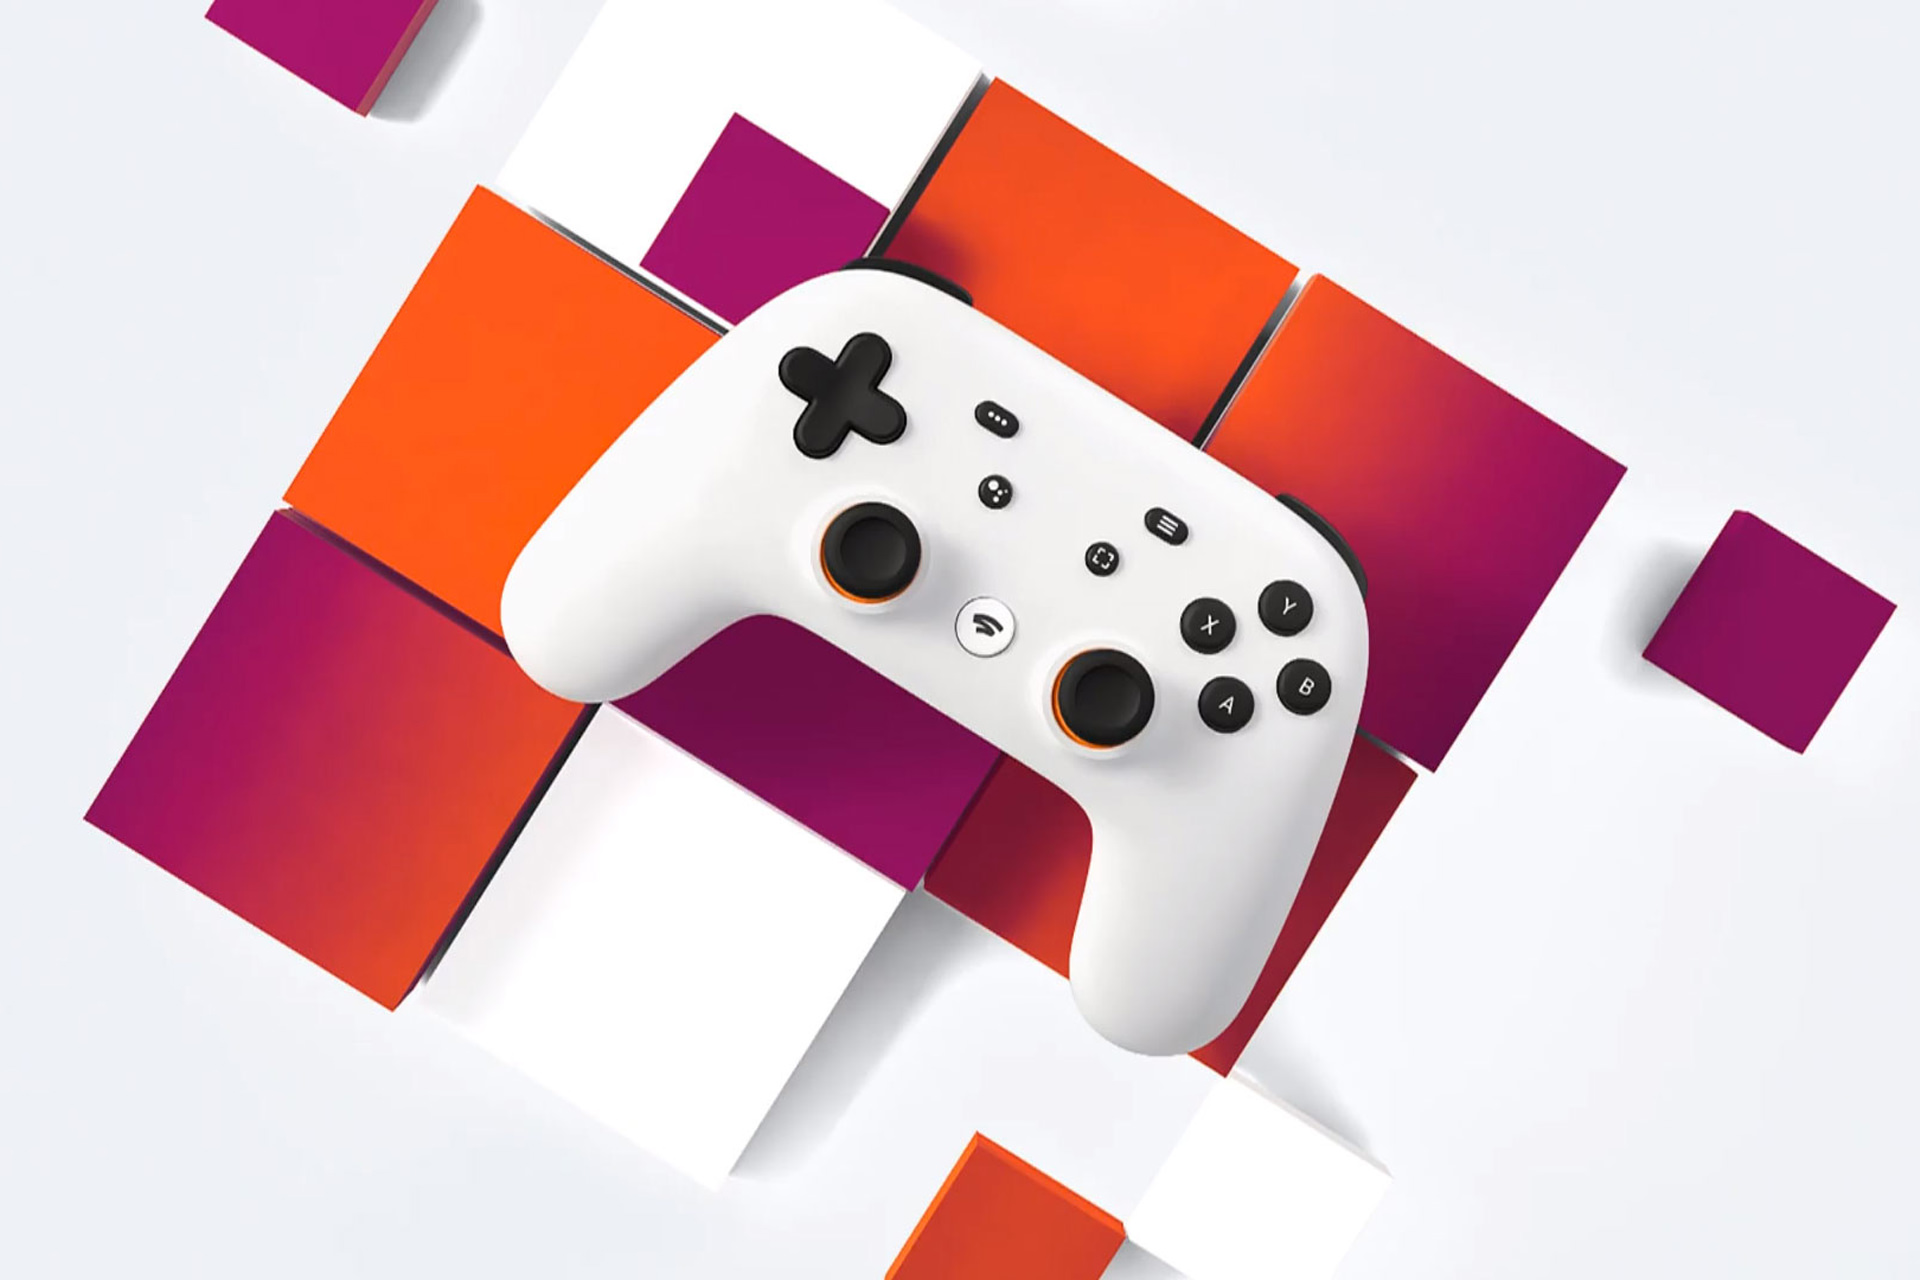 Google Stadia controller handle from the top view